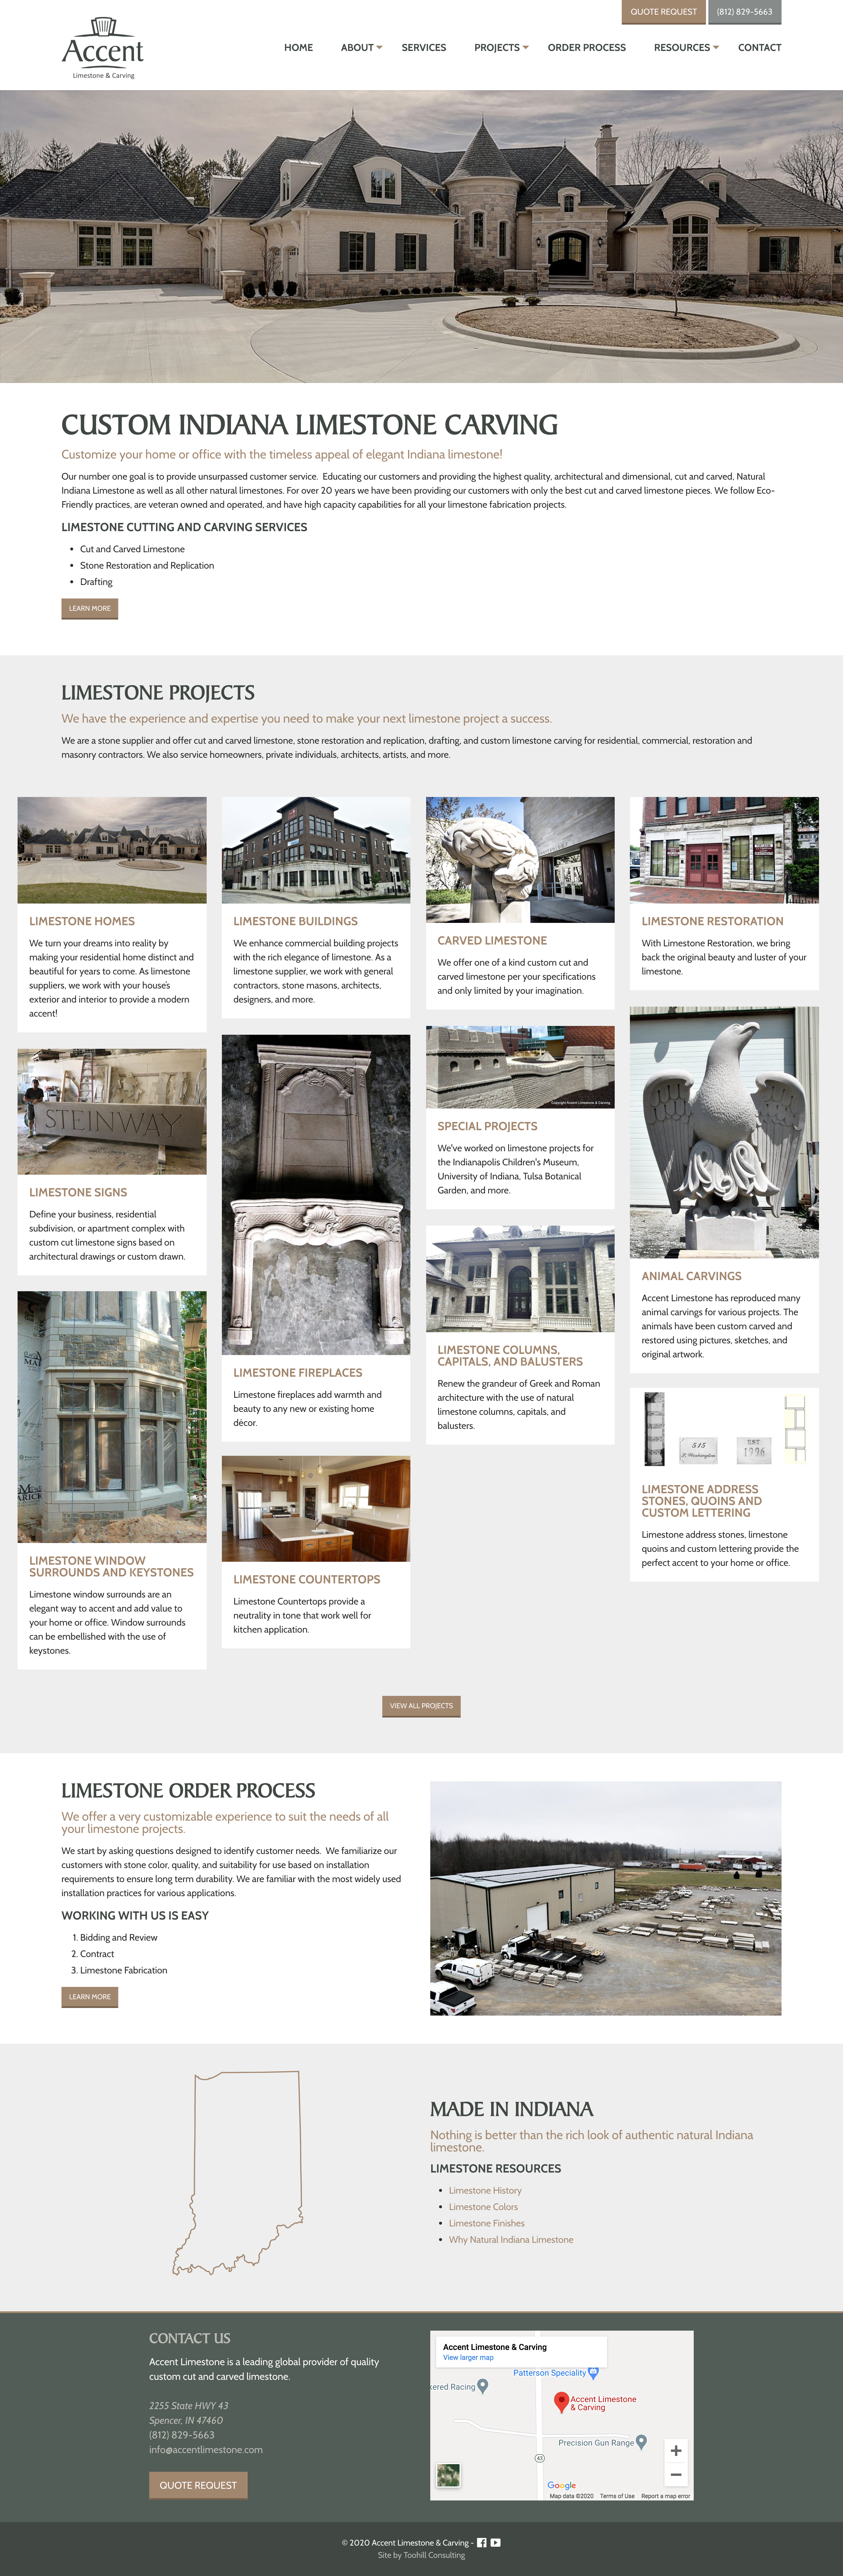 Accent Limestone Website Homepage